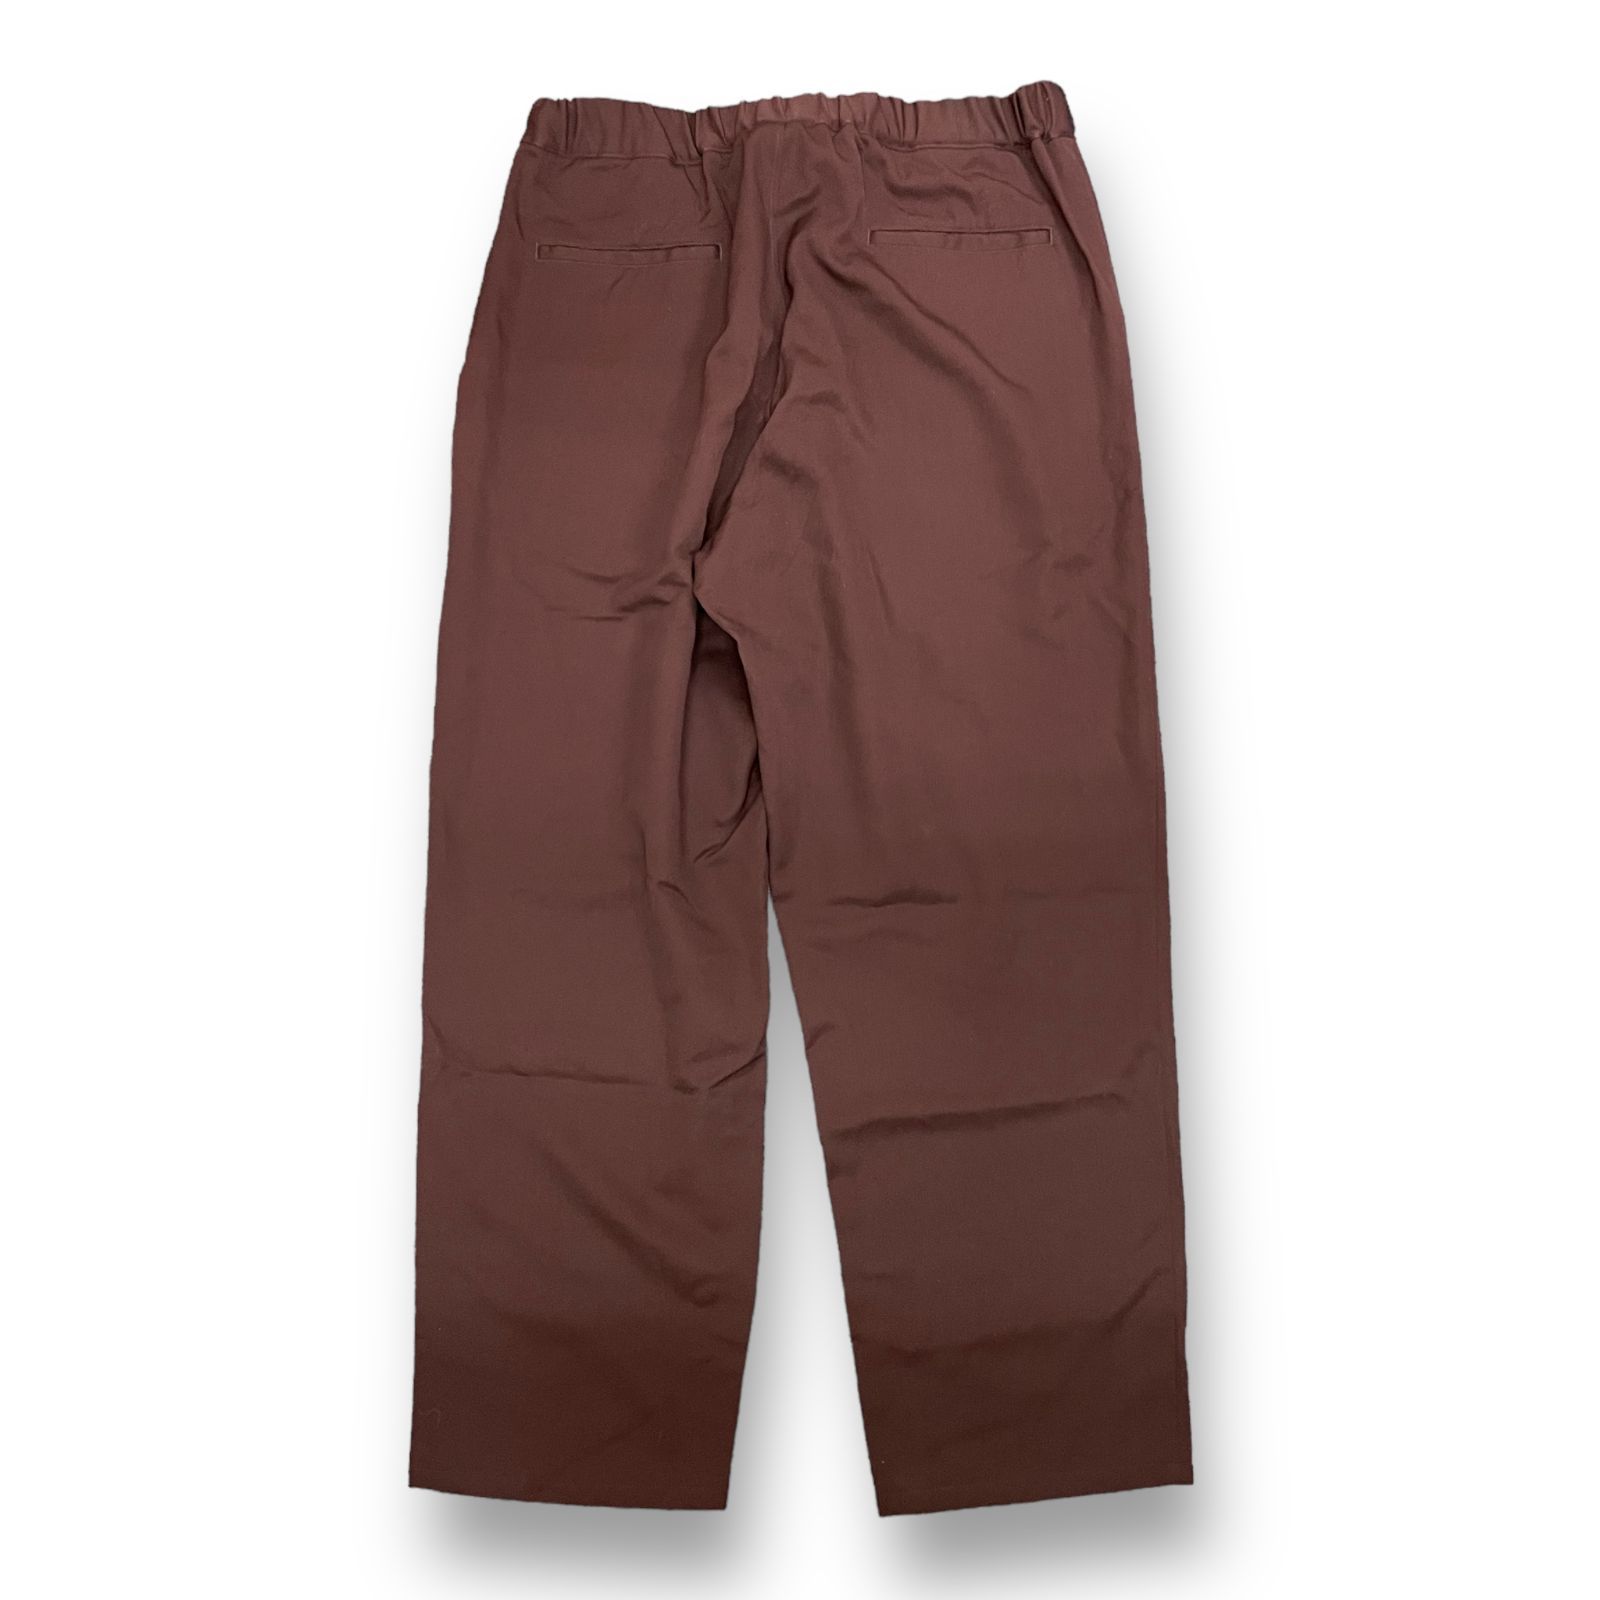 Graphpaper x EDIFICE x L'ECHOPPE 19AW Wool Twill Cook Pant ウール 